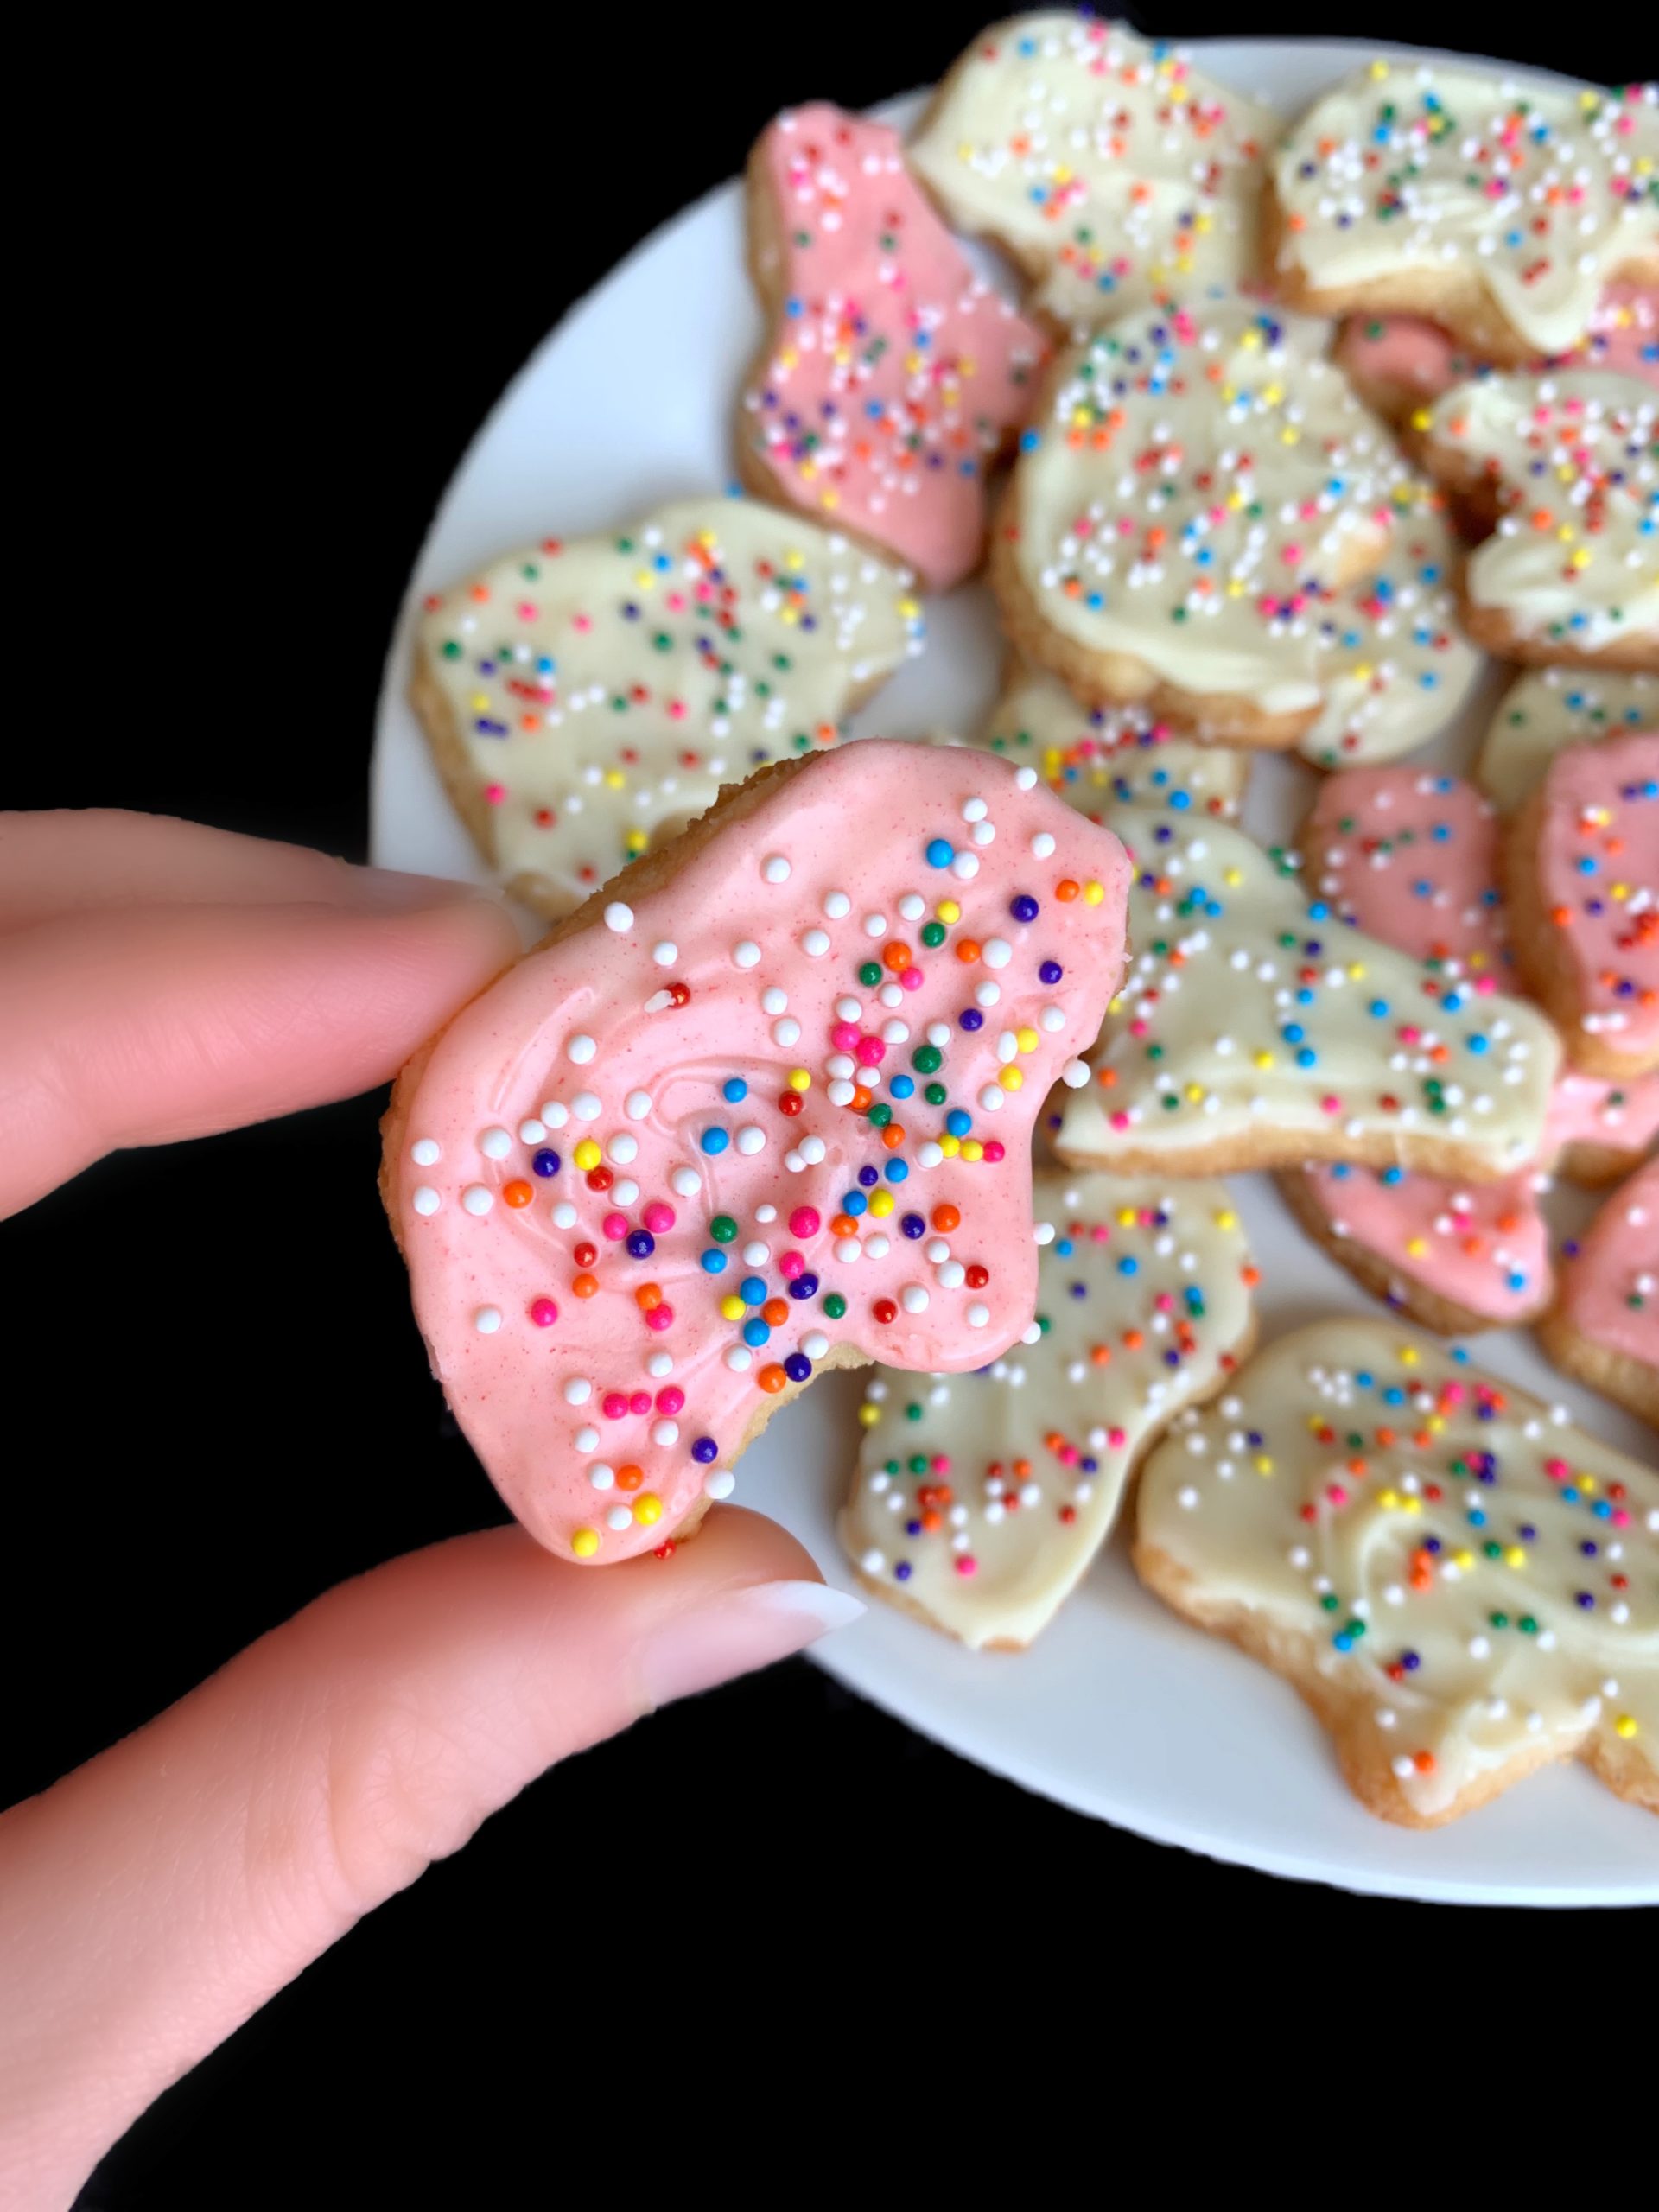 Keto frosted animal cookies